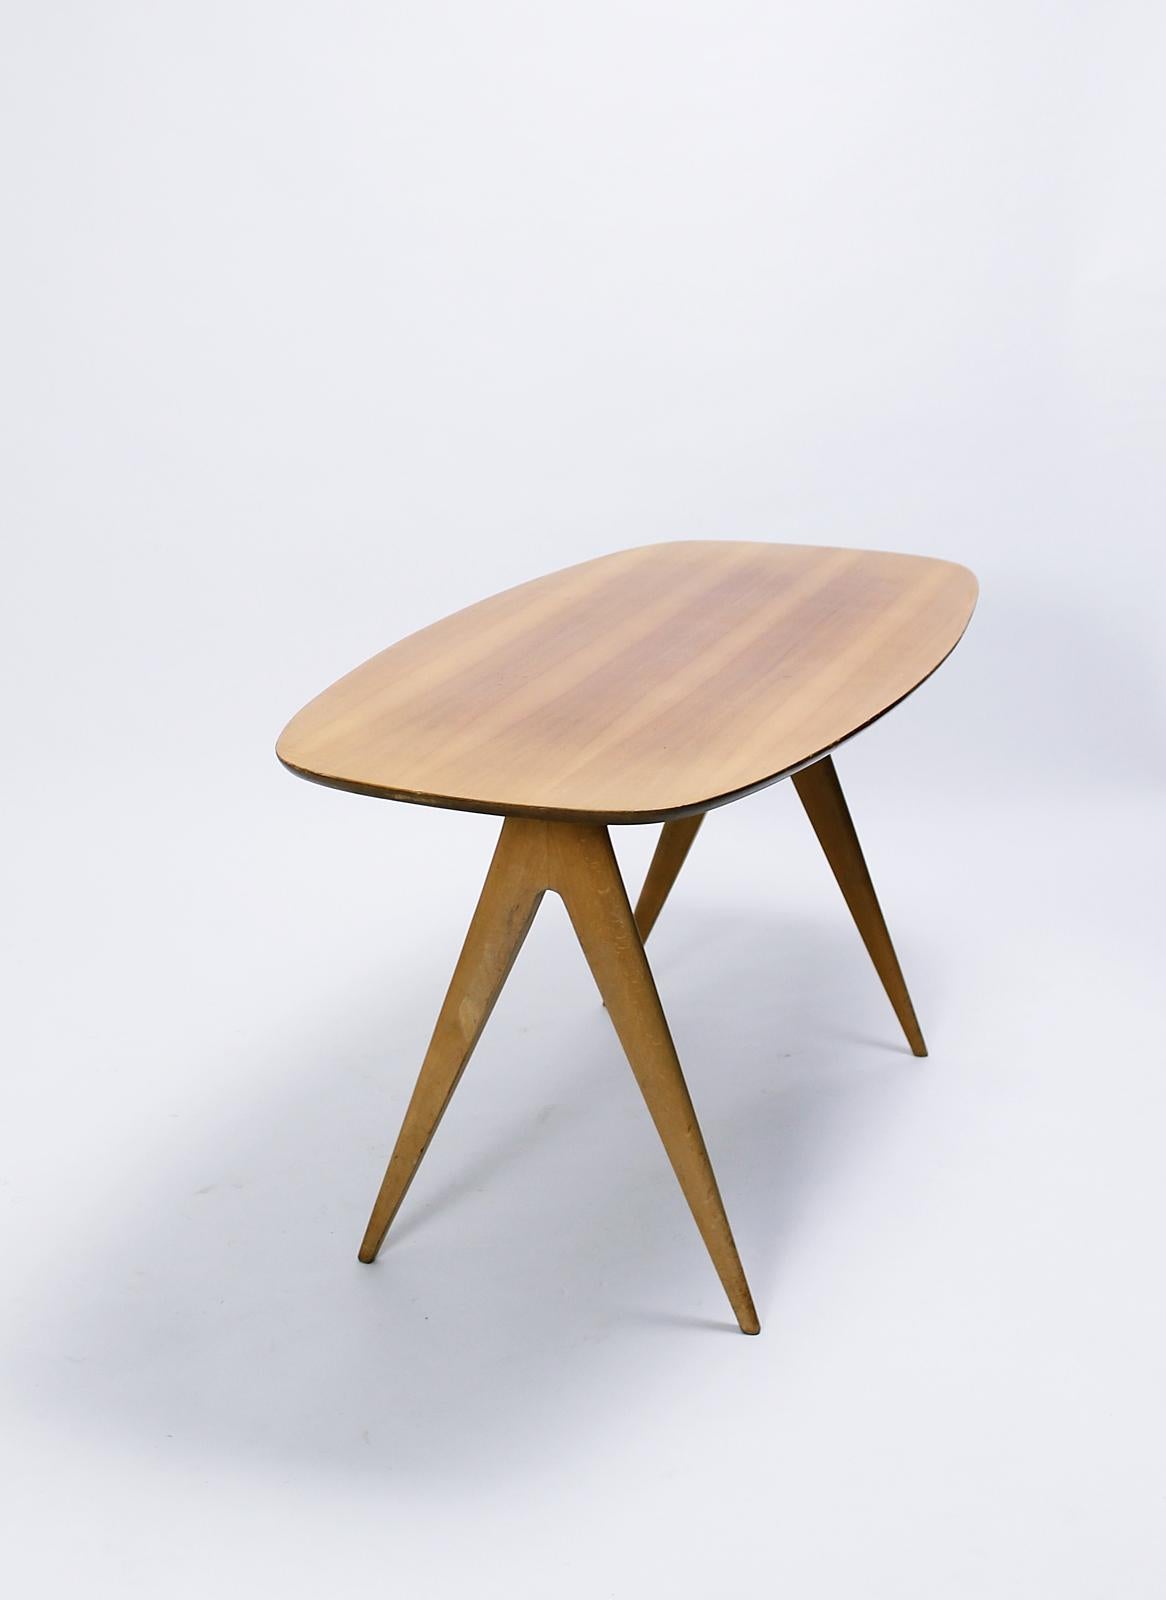 Very nice Italian origin Mid-Century Modern coffee or cocktail table on compass shaped beech legs and walnut veneer top. In good vintage original condition.